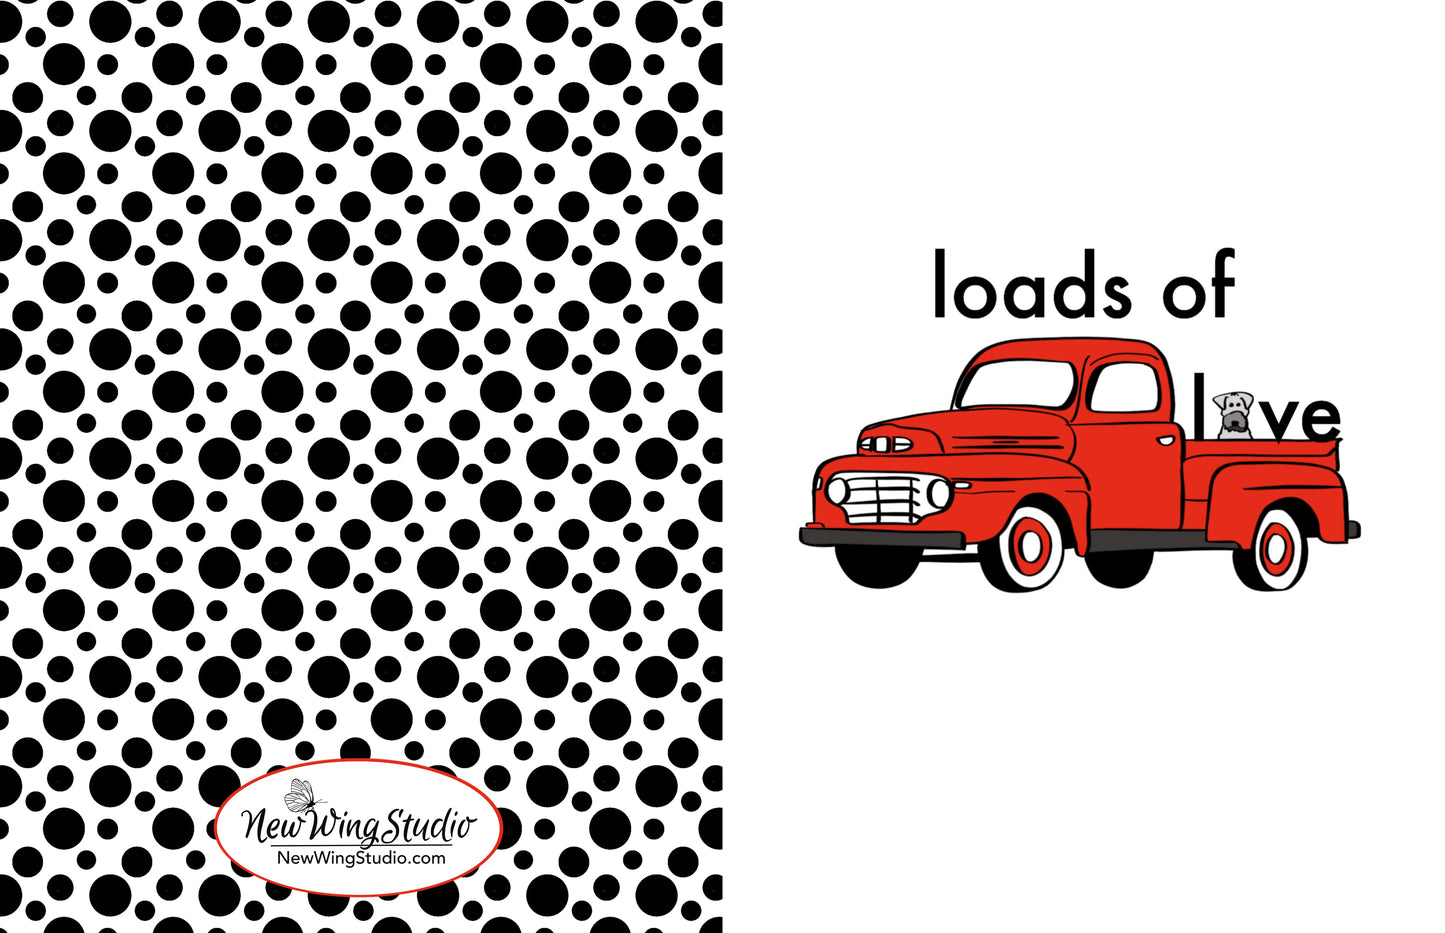 “Loads of Love” is one of our best selling greeting cards and features an adorable dog in the bed of a vintage bright red pickup truck.  If it weren't cute enough, the dog's head is the "o" in "love."  The back of the card features adorable puppy polka dots.   This card is perfect for any occasion.  All of our original artwork is created by Jennifer Knight.  NewWingStudio.com